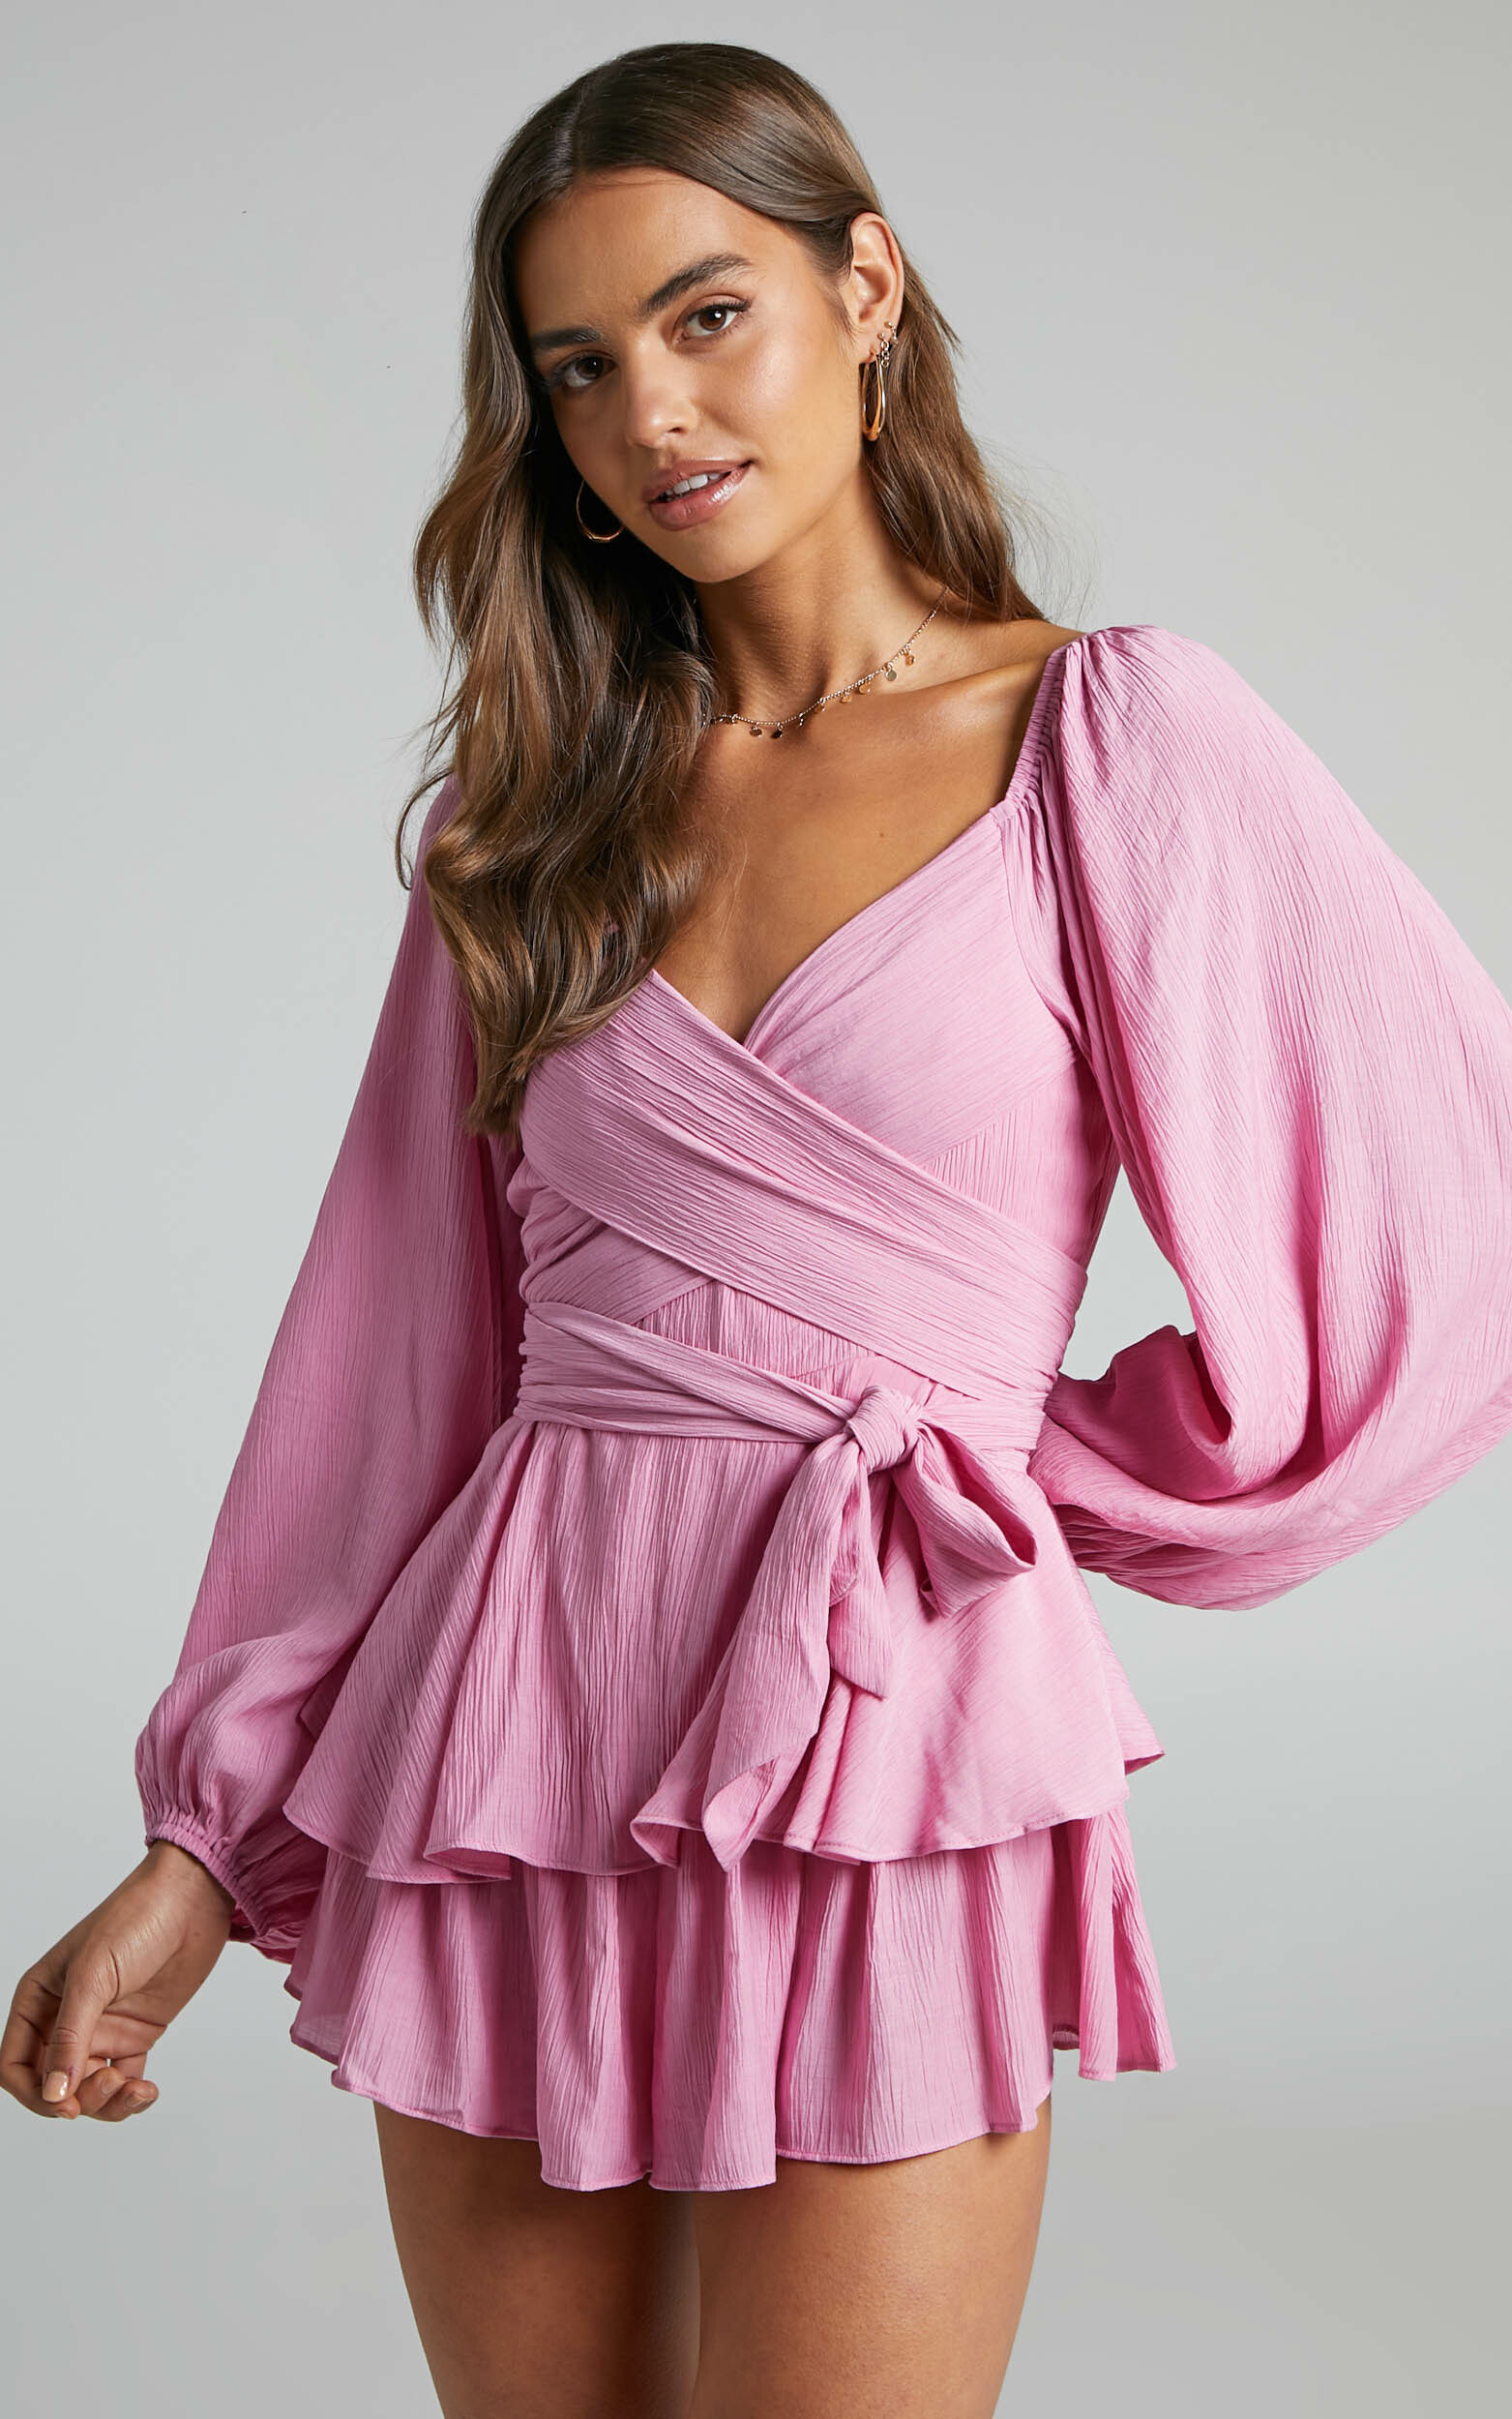 Florice Wrap Front Frill Playsuit in Pink - 04, PNK3, hi-res image number null